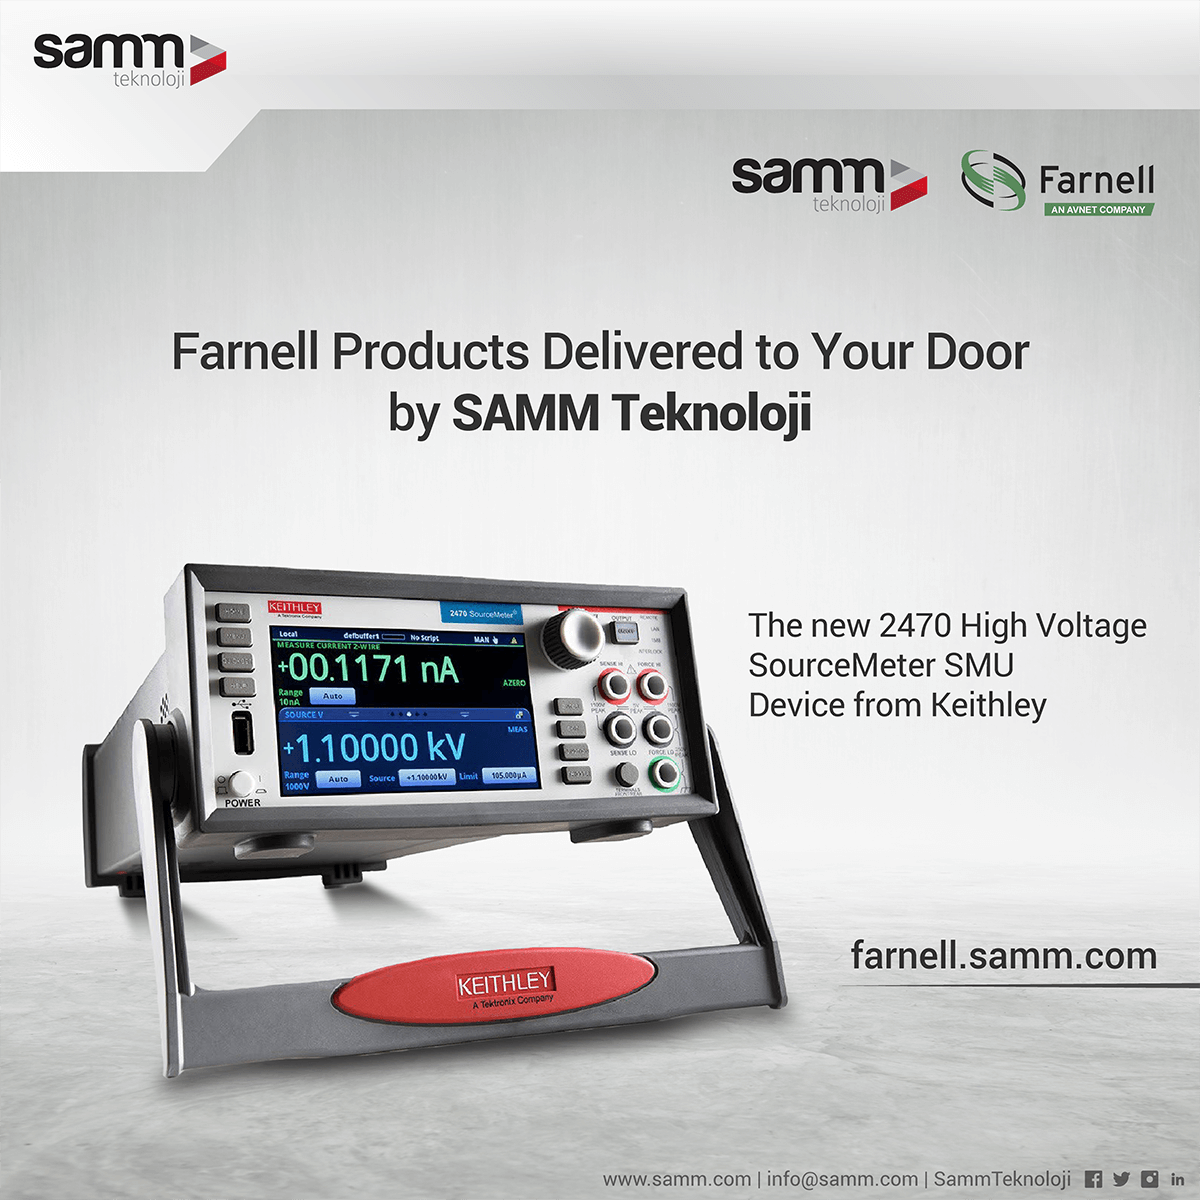 Farnell Products Delivered to Your Door by SAMM Teknoloji